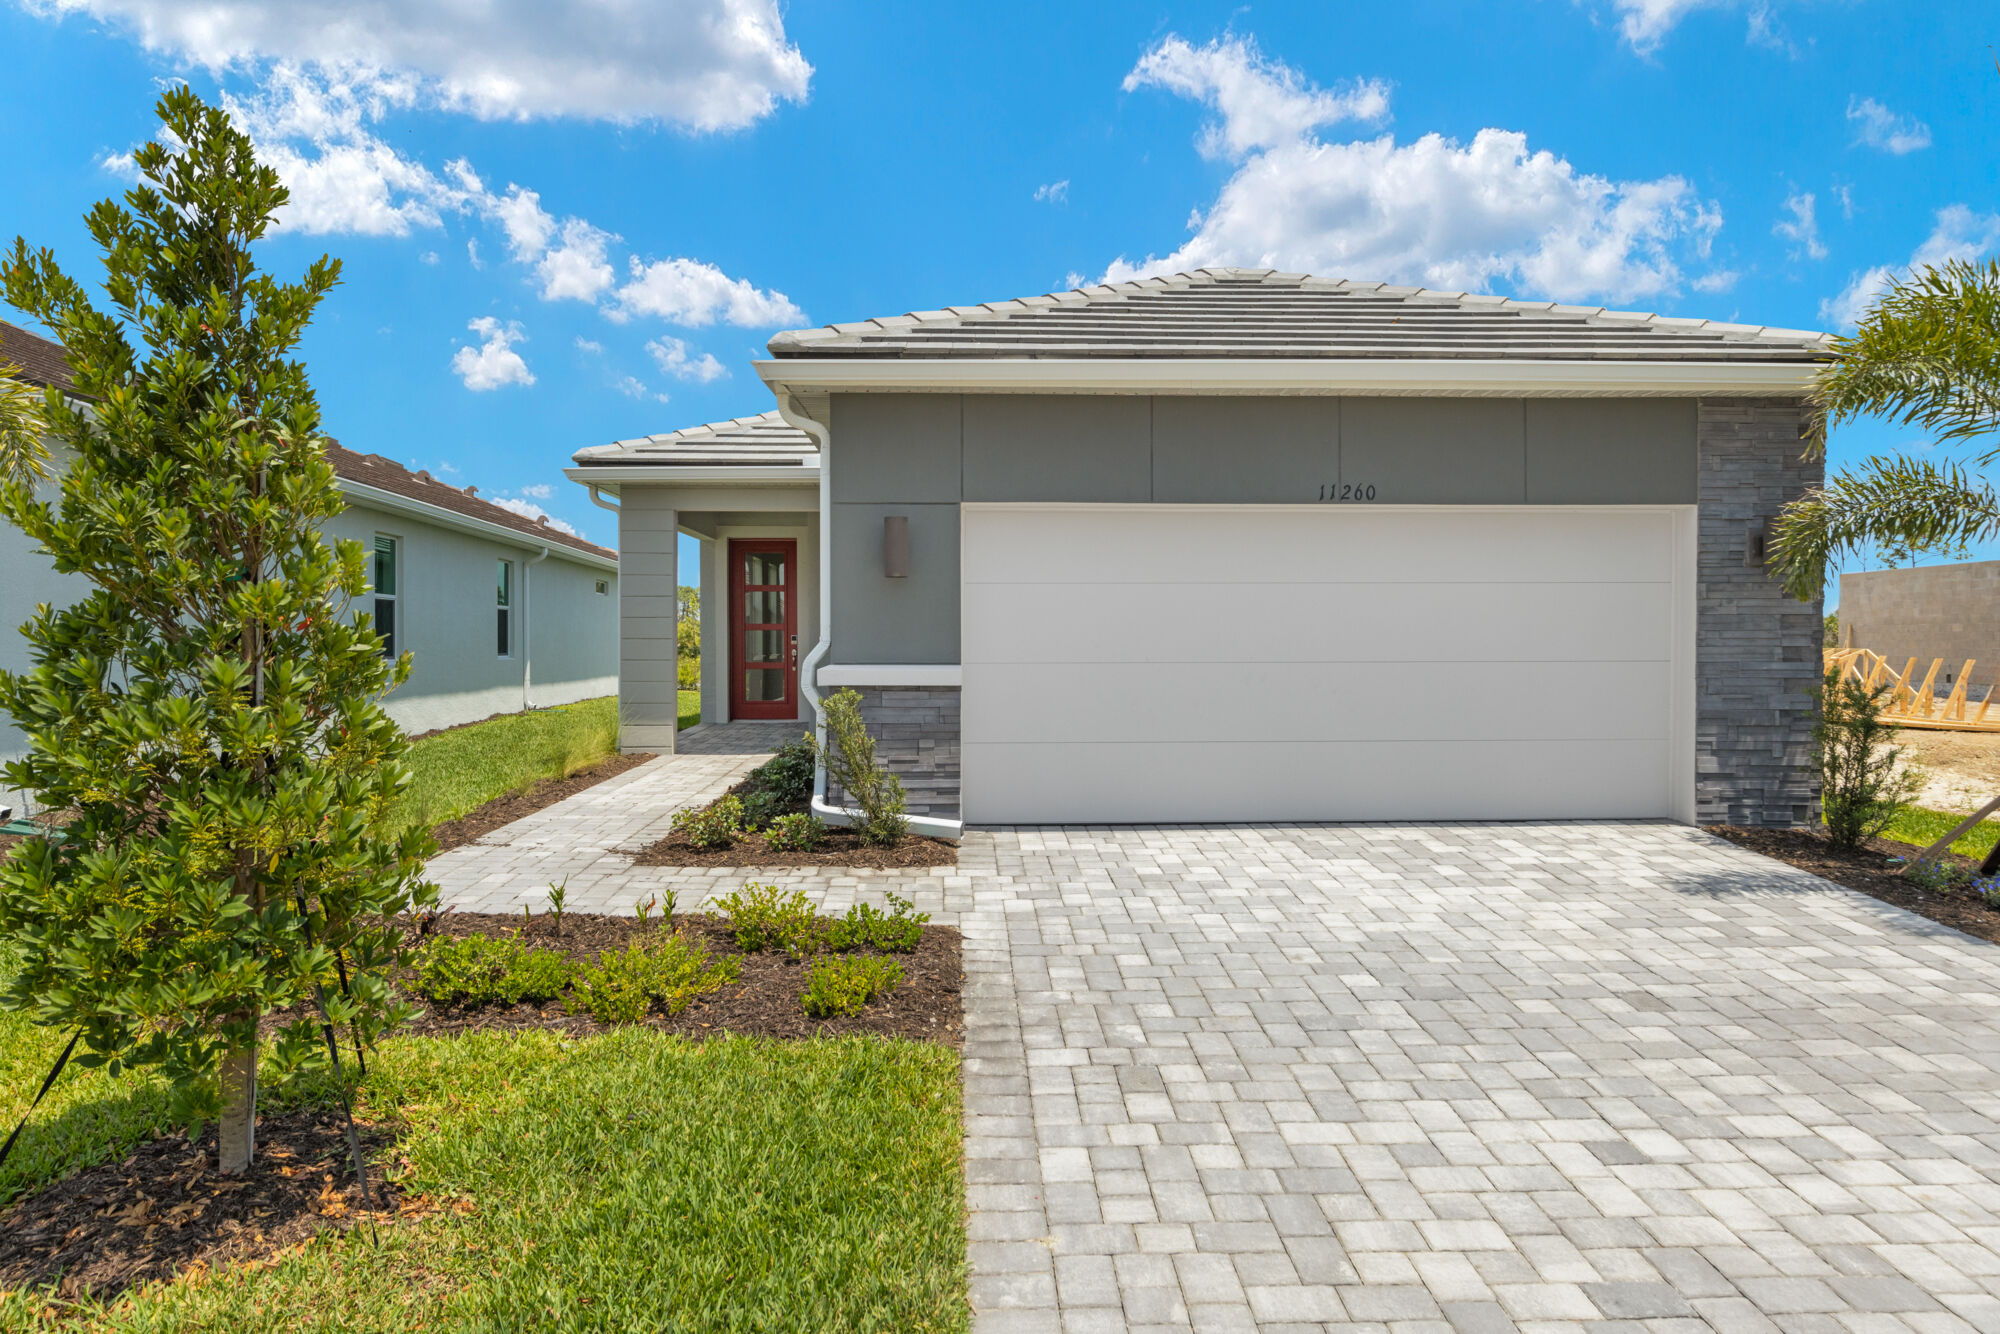 Single family, 2 bedroom, 2 bath, extended 2-car garage, open kitchen, dining and great room, owner's suite with walk-in closet, extended shower, dual sink raised vanity, split bedroom plan, luxury vinyl plank flooring, breakfast bar, oversized sliderts to lanai